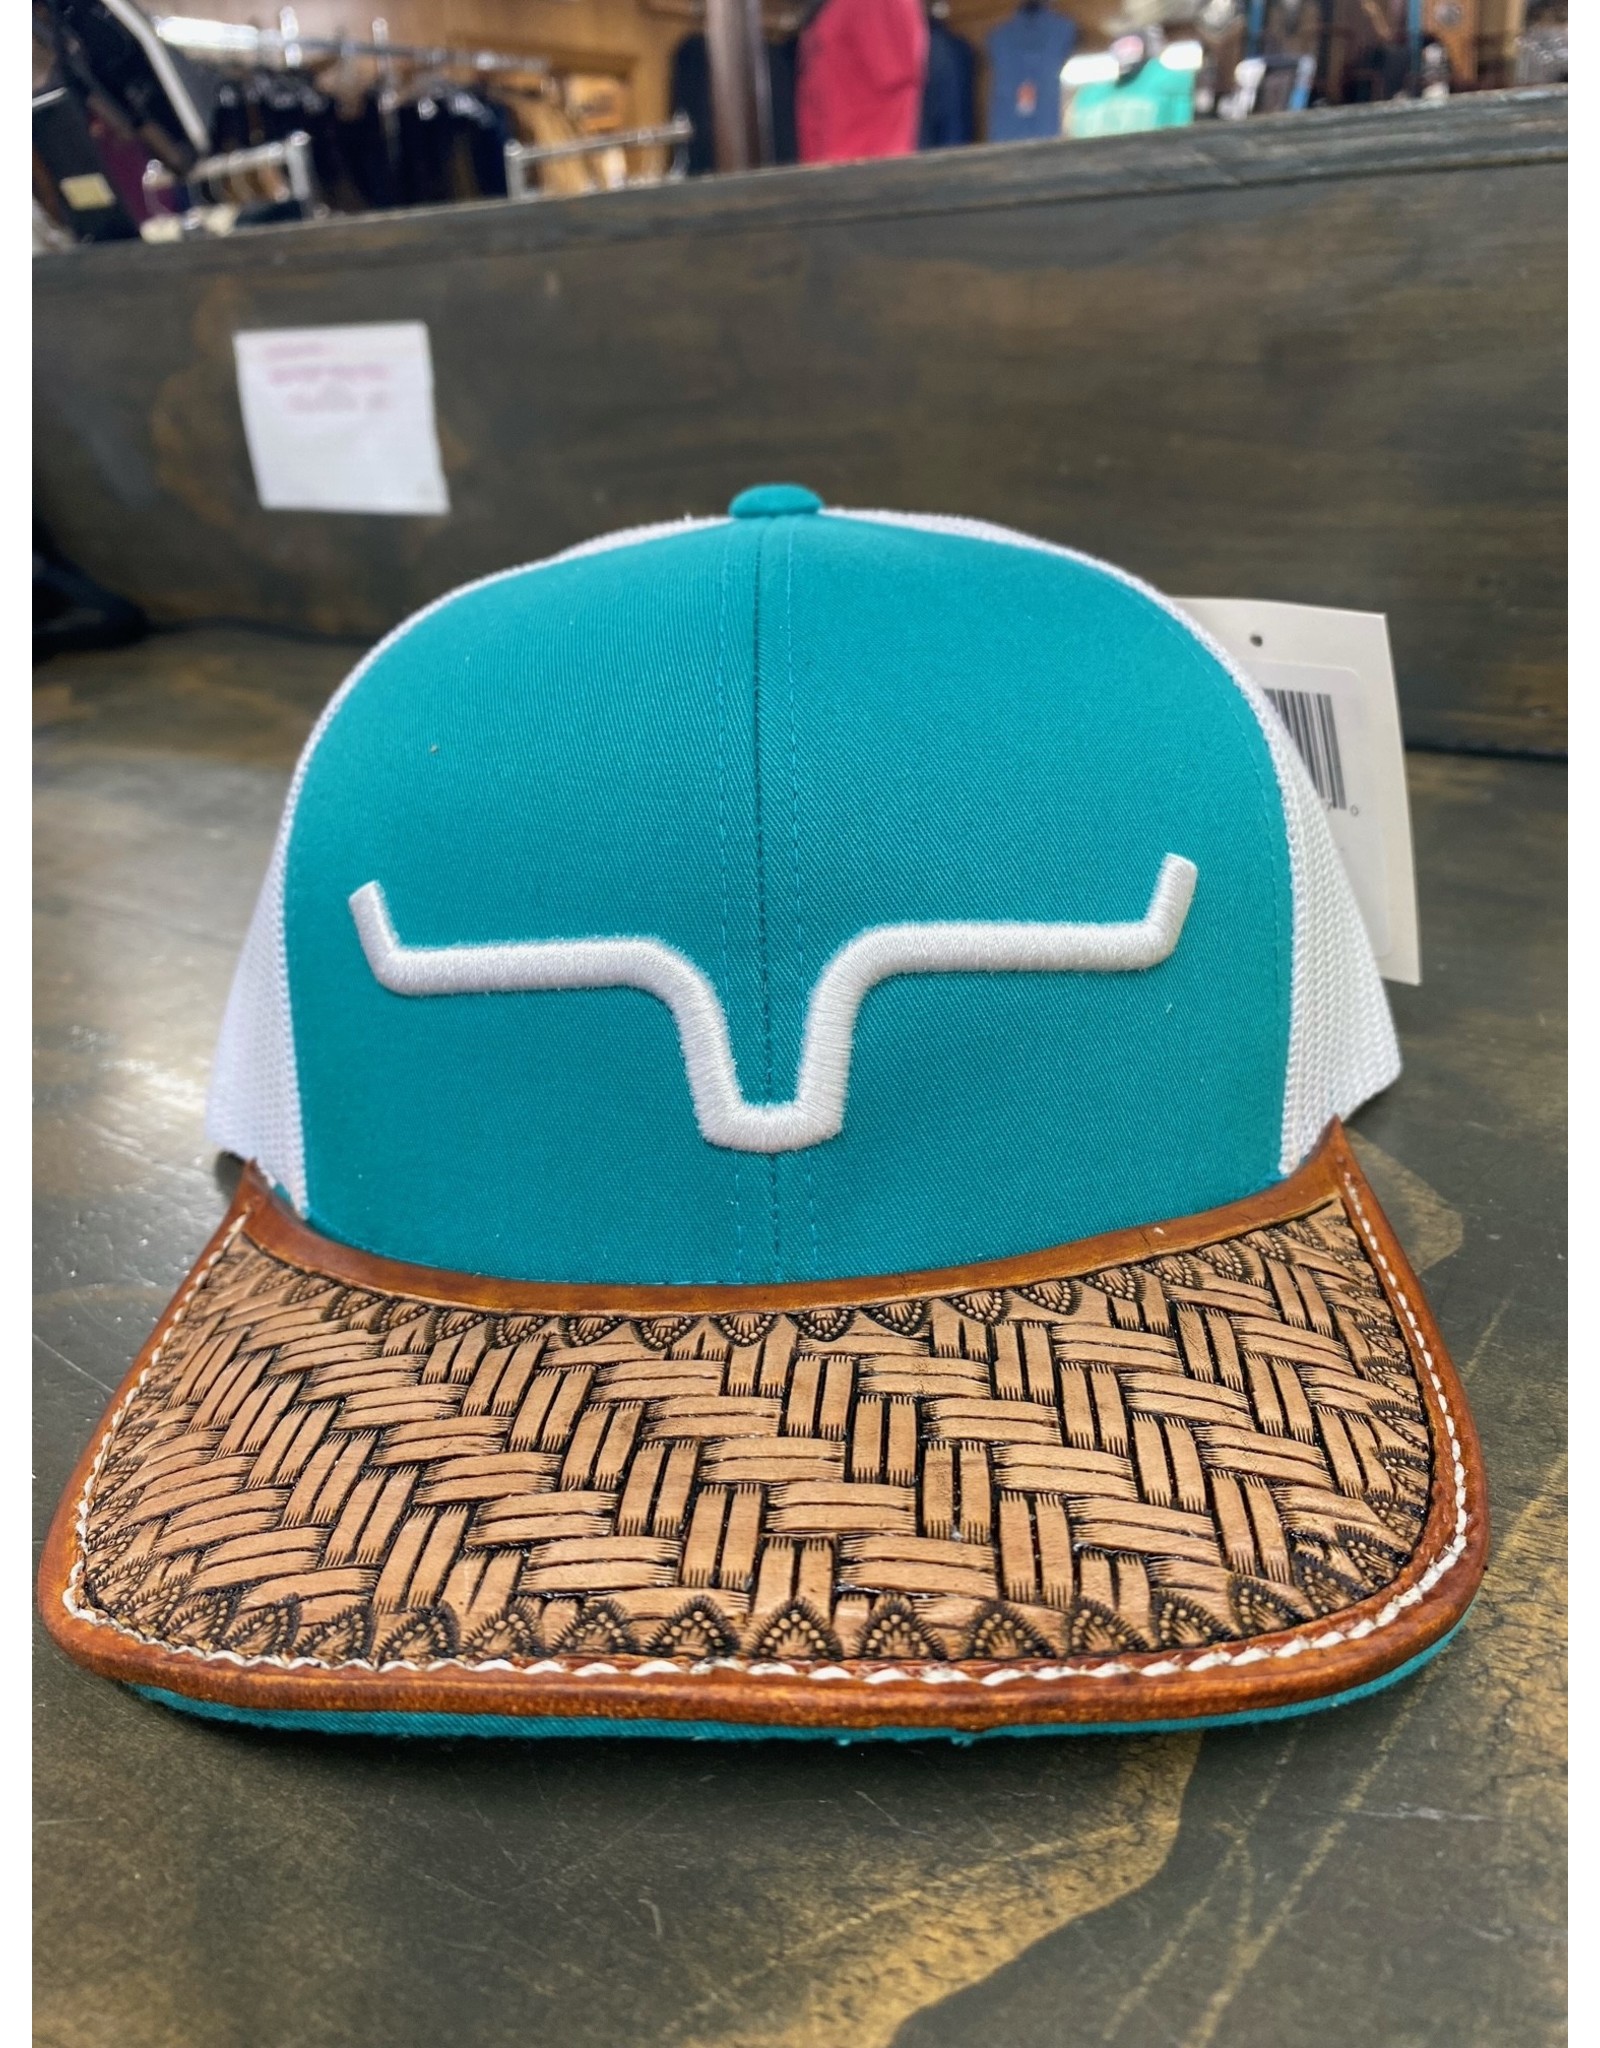 Chase Combs Leather Kimes Teal Trucker with Basketweave Brim